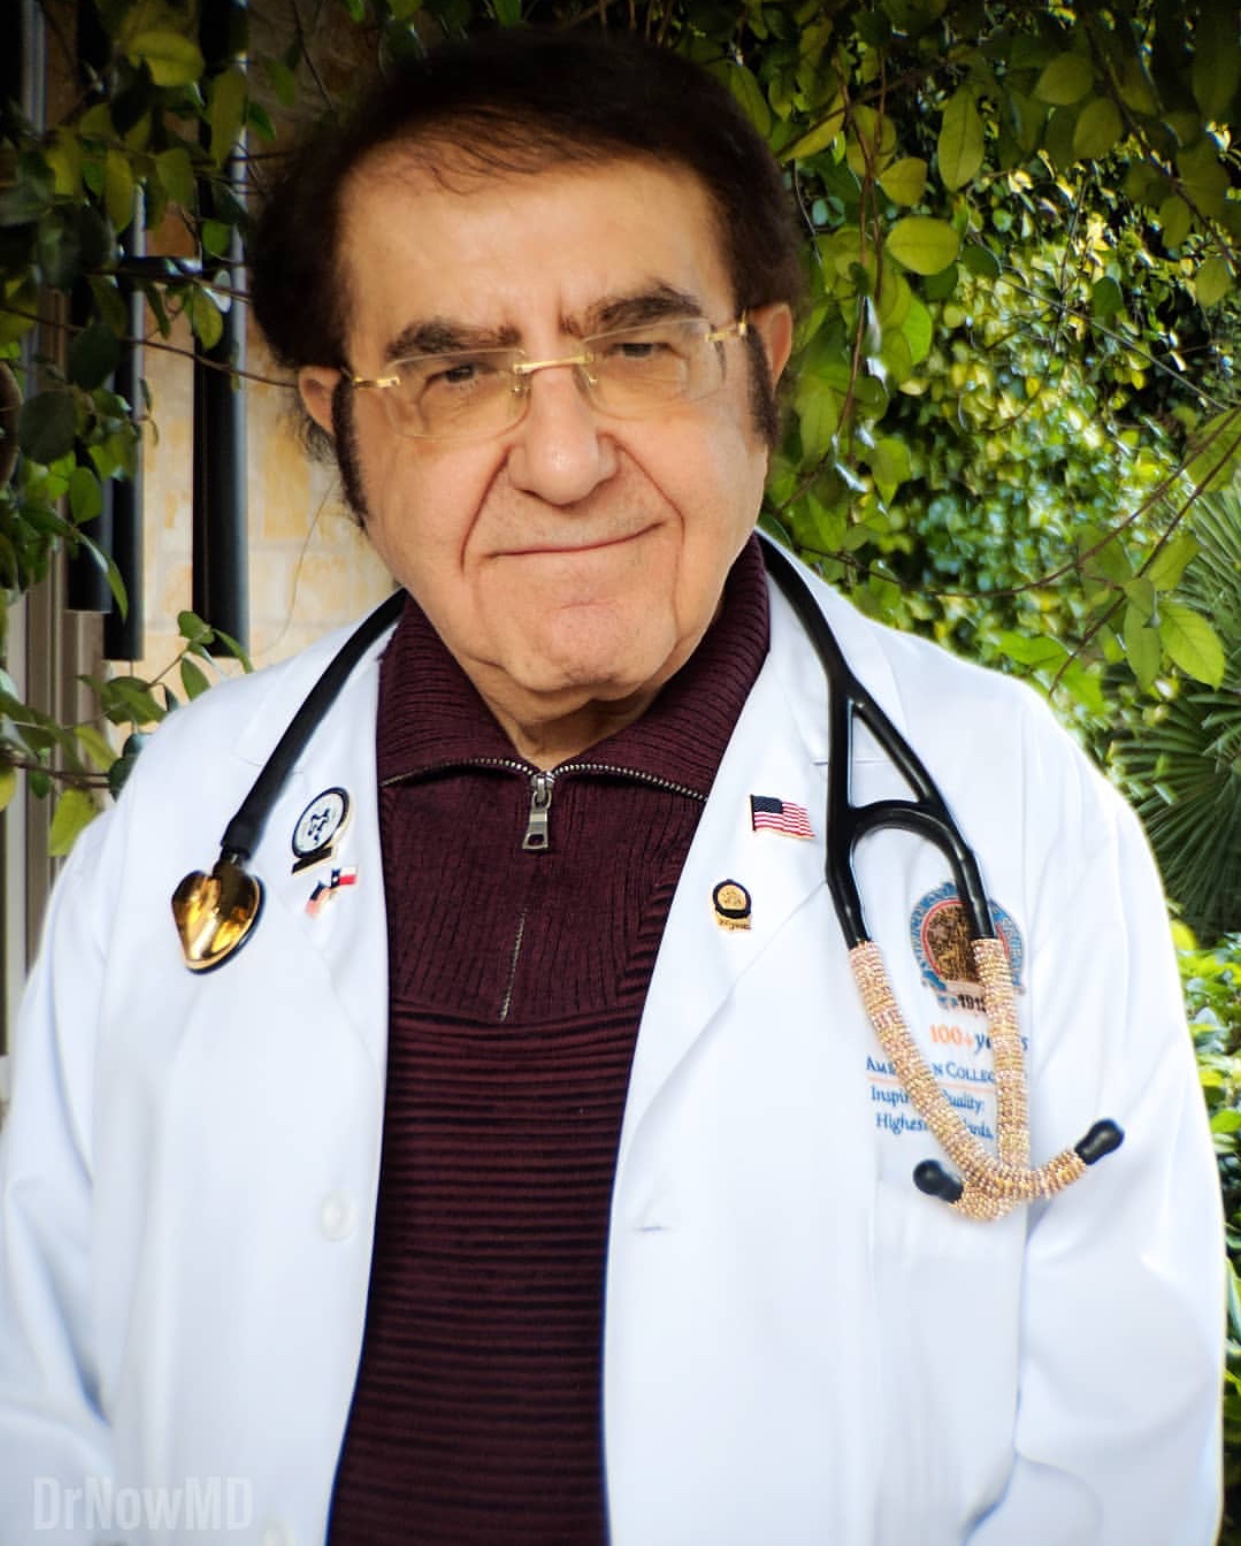 My 600-lb Life” Dr. Younan Nowzaradan to Deliver Keynote at the